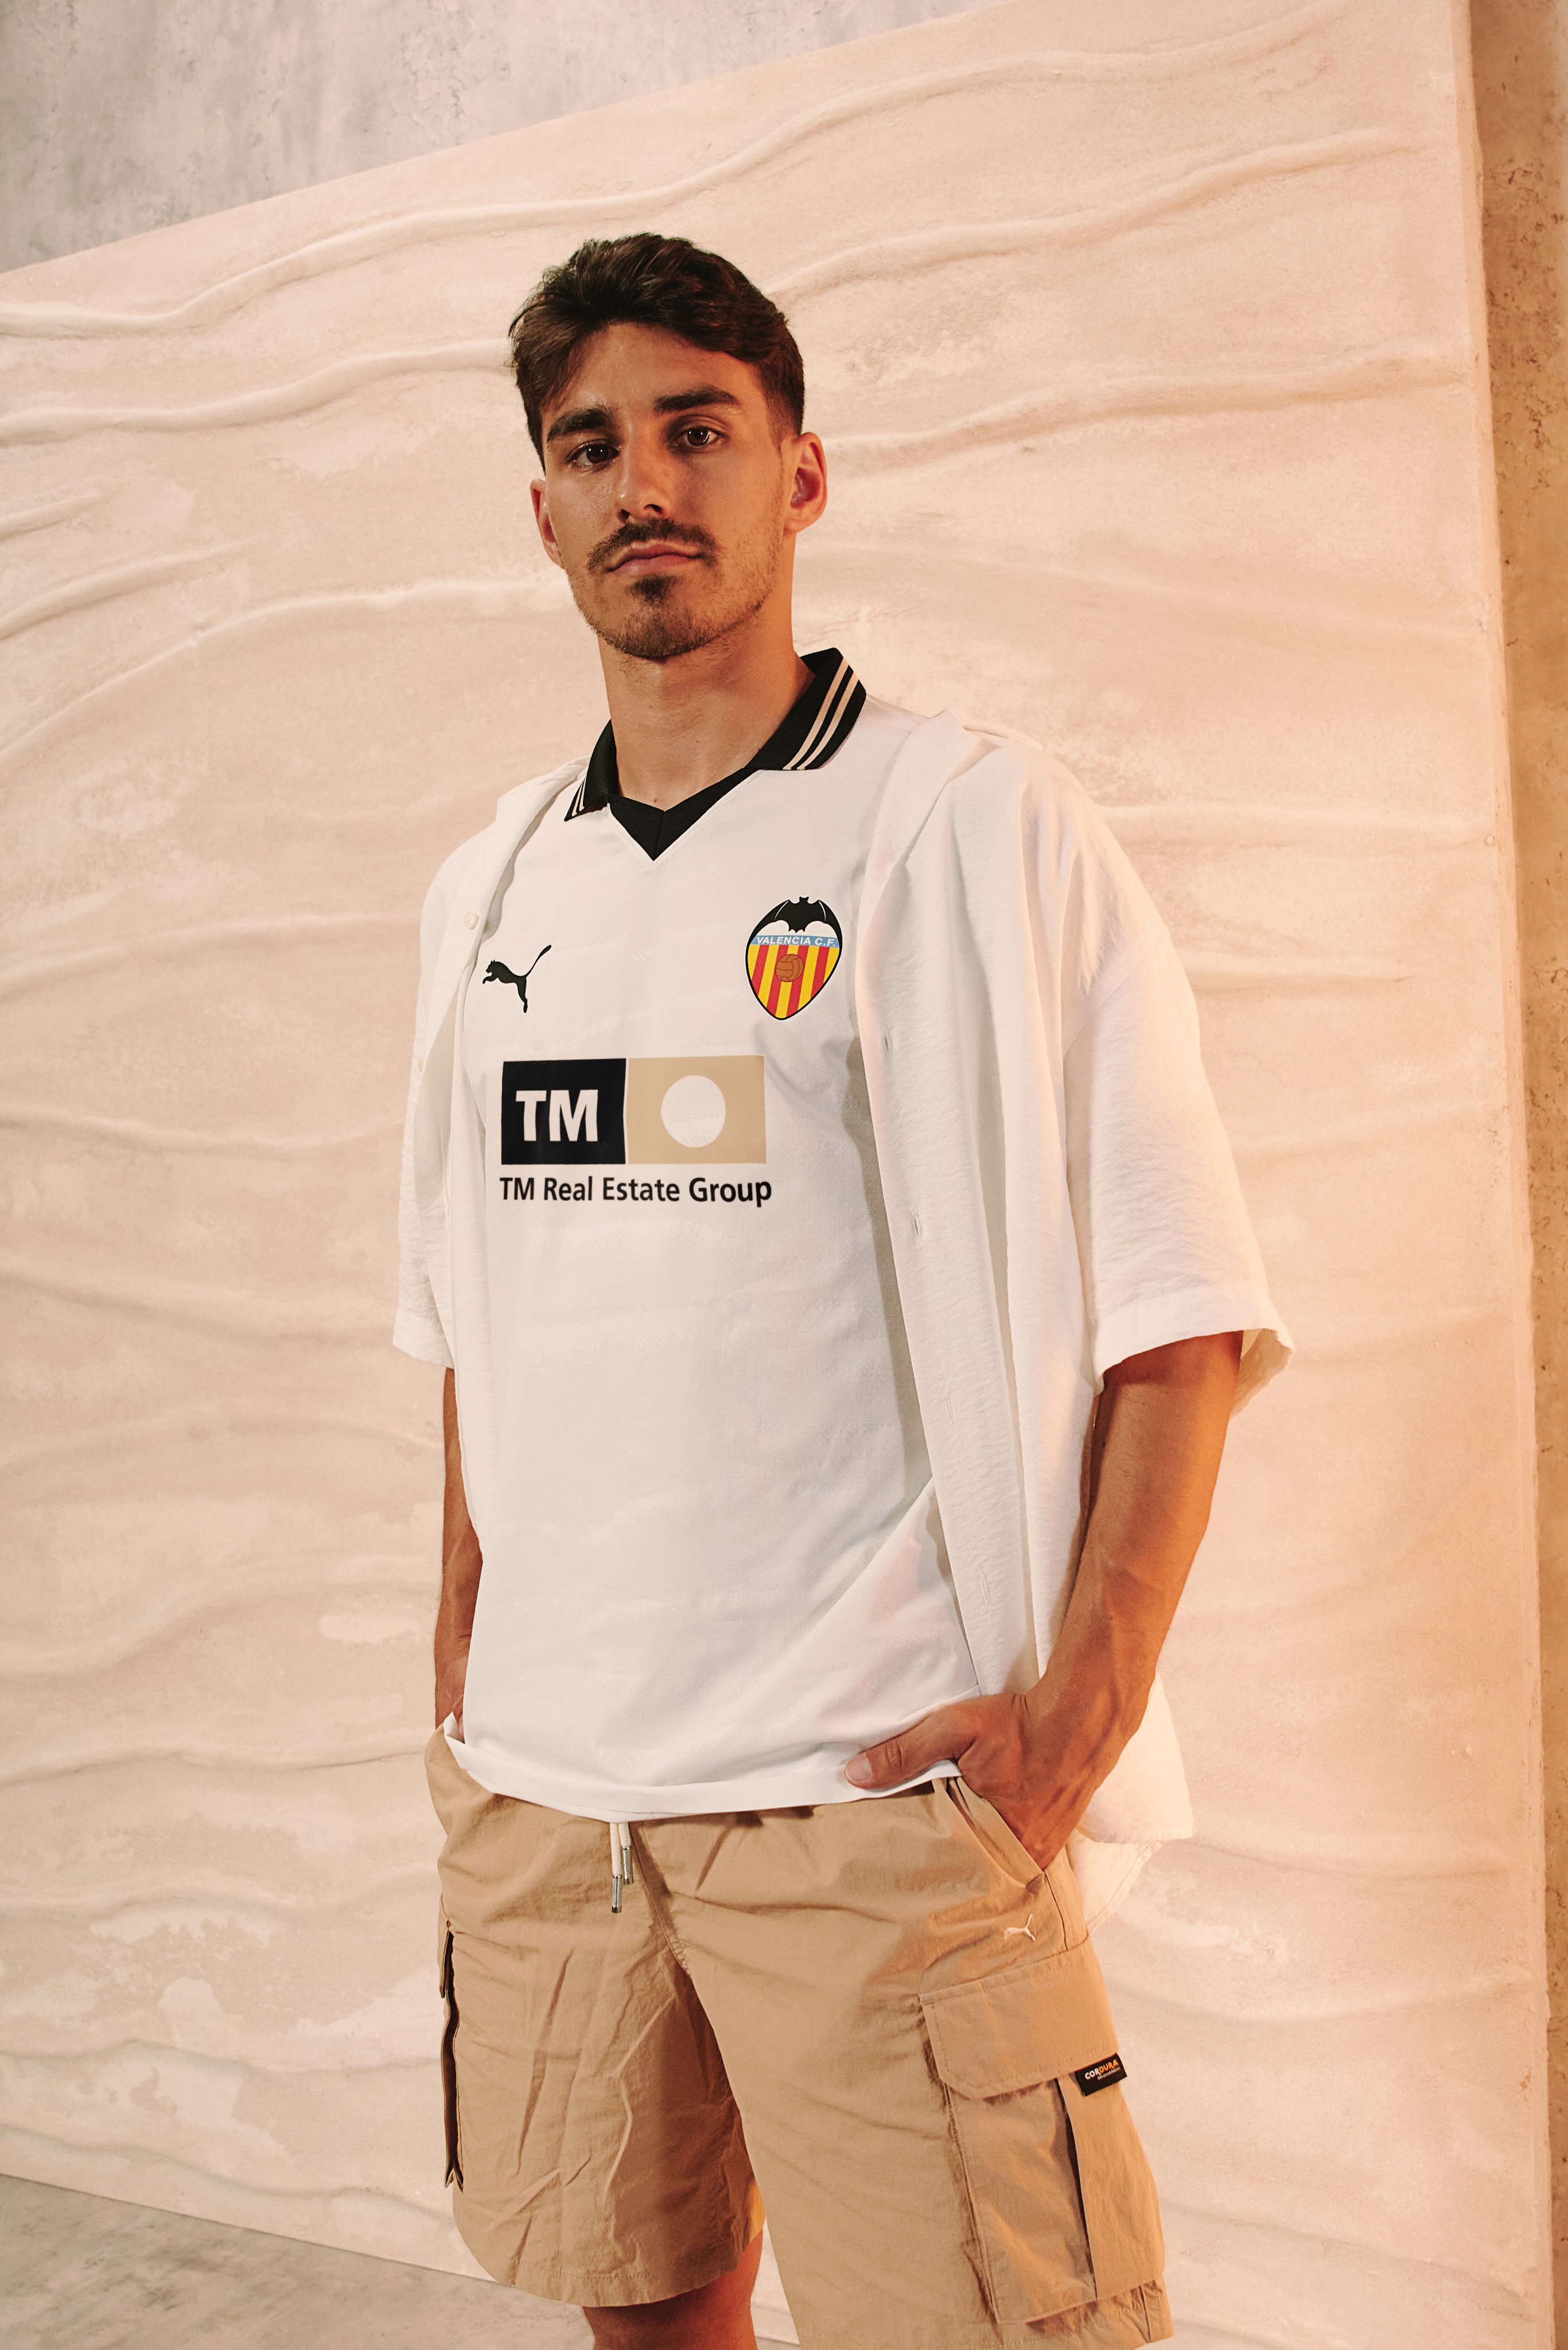 Valencia on Twitter: "Mucha clase, @andremms7 @valenciacf ❎ @pumafootball Compra la nueva camiseta AQUÍ: https://t.co/Ygh9330uRs https://t.co/F7Ch3m7atO" / Twitter